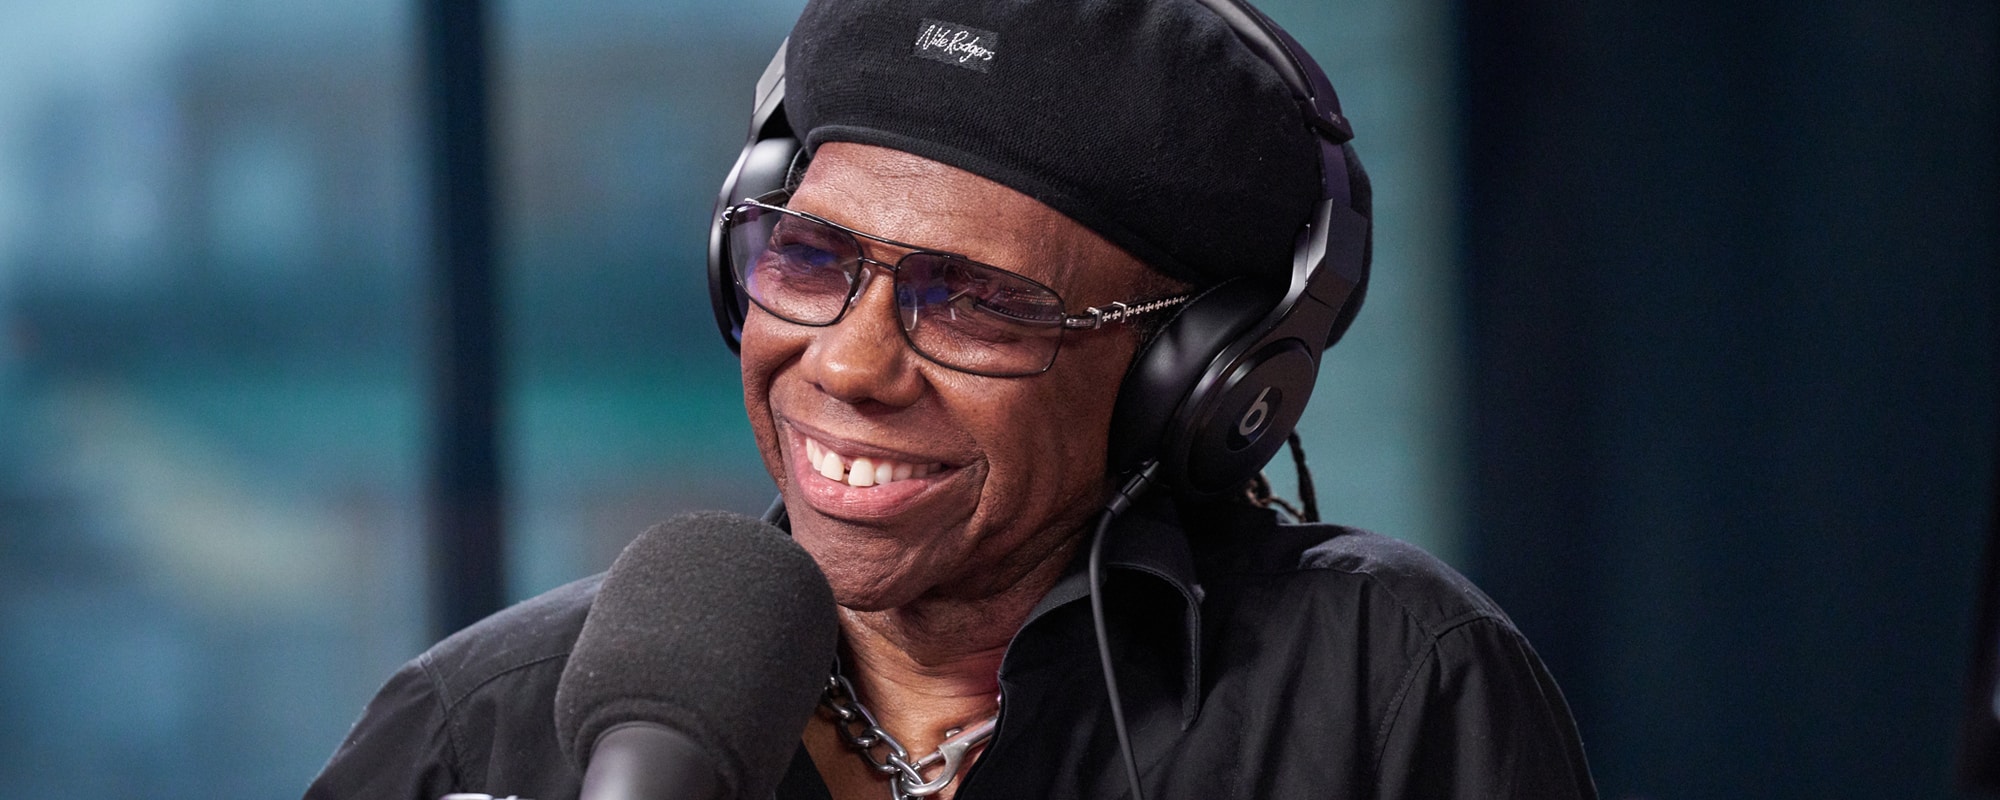 Nile Rodgers Welcomes Stargate and Jack Savoretti to ‘Deep Hidden Meaning Radio’